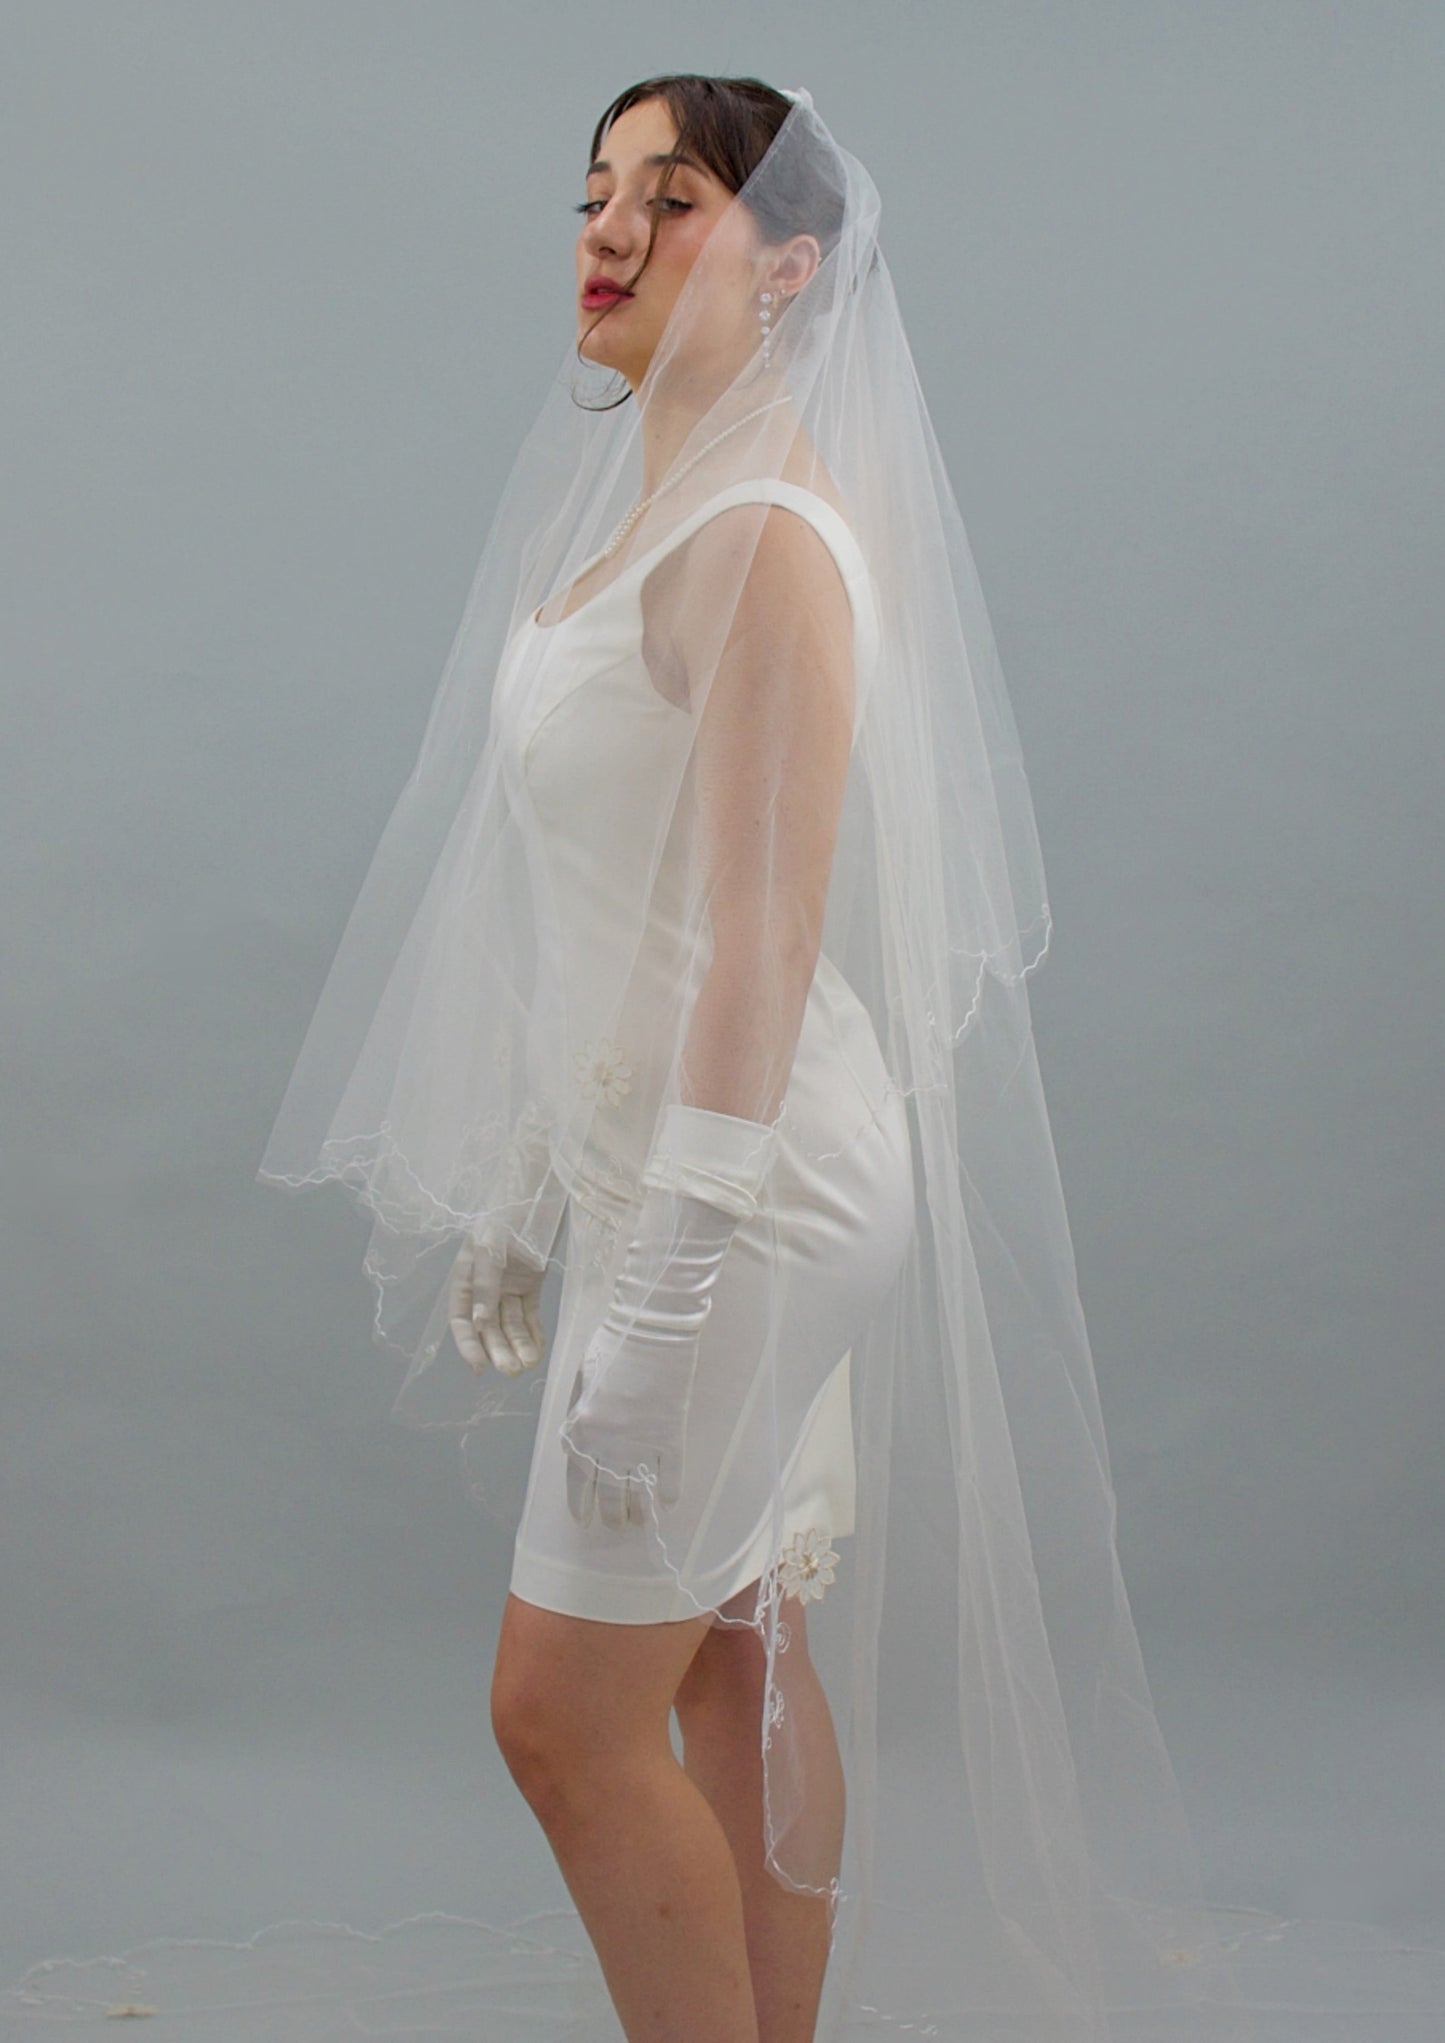 Magnolia Two Tiered Cathedral Veil